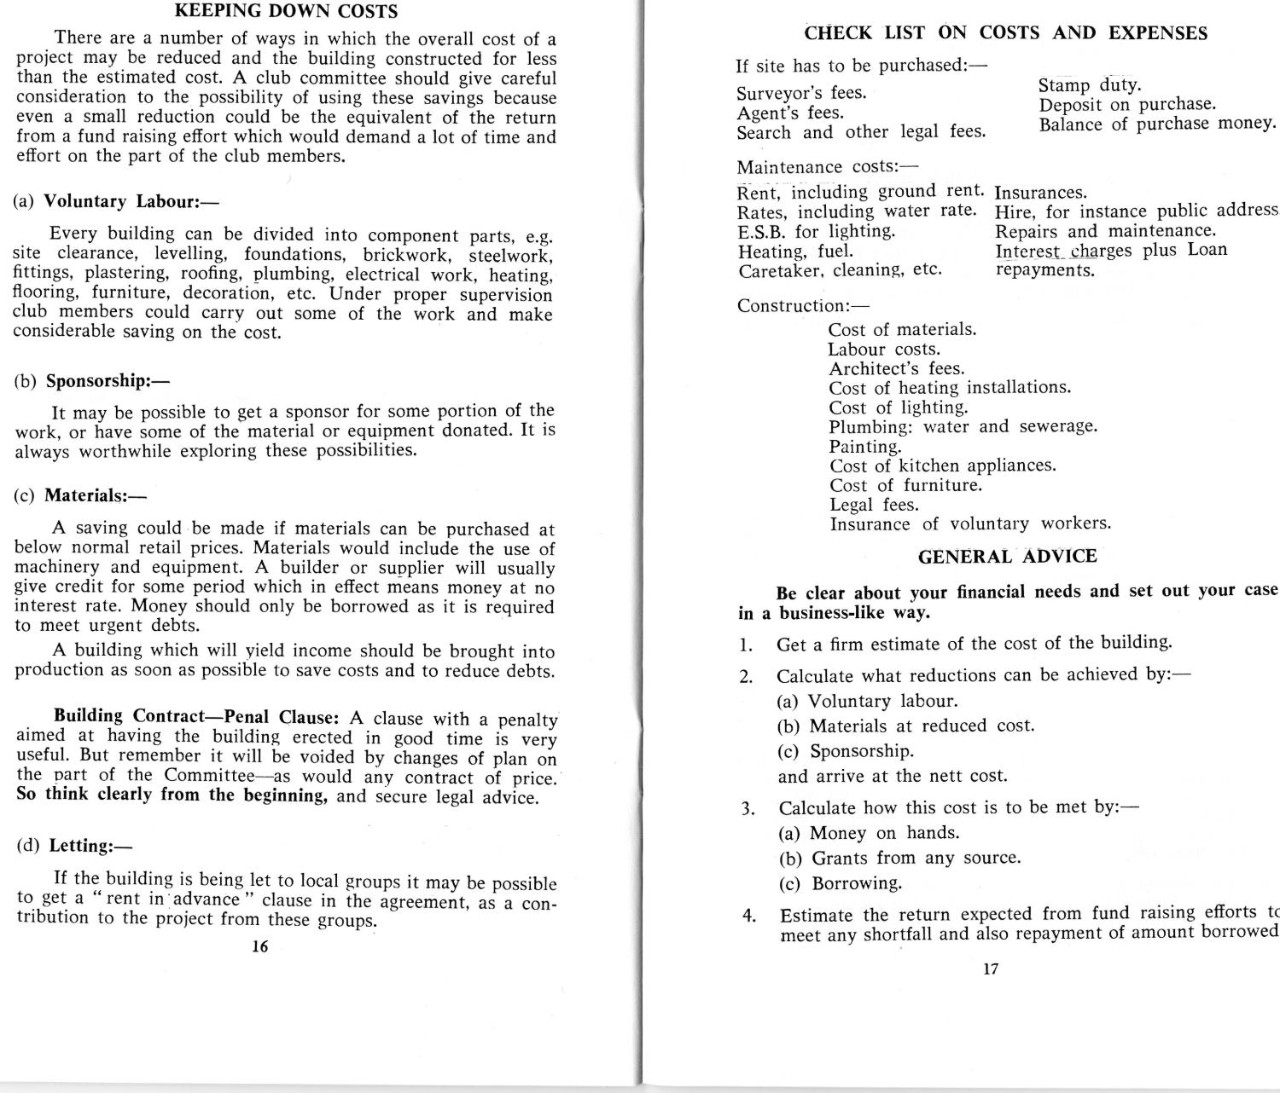 An extract from the 1975 GAA publication Dressingrooms and Social Centres for GAA Clubs highlights the importance of voluntary labour to the development of club facilities.